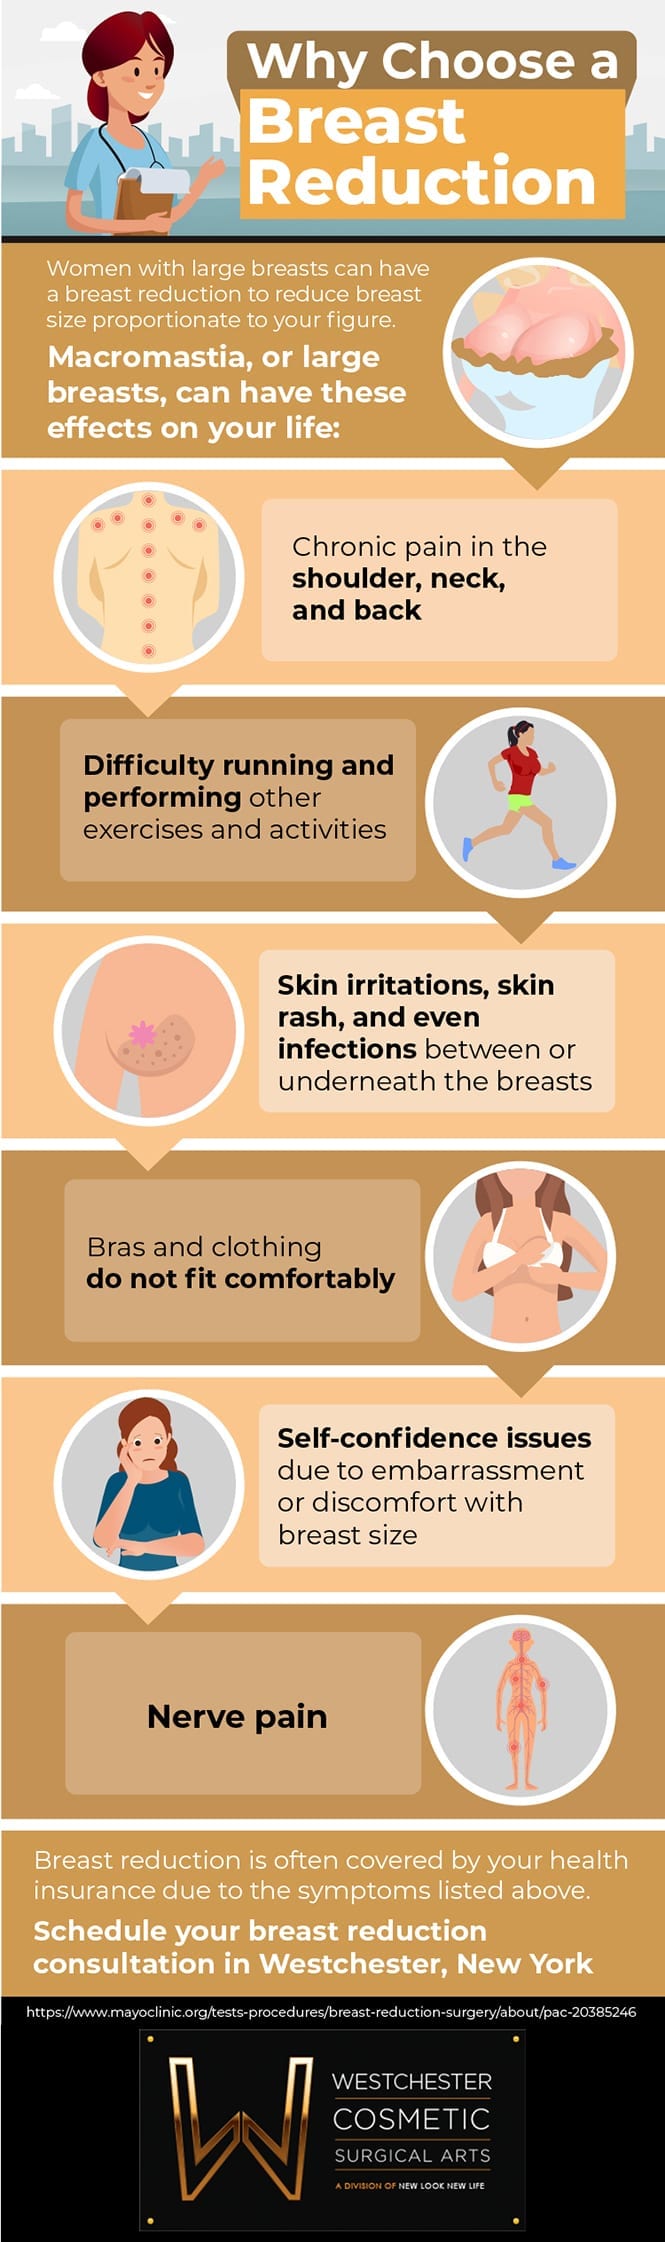 Breast reduction graphic goes over reasons why